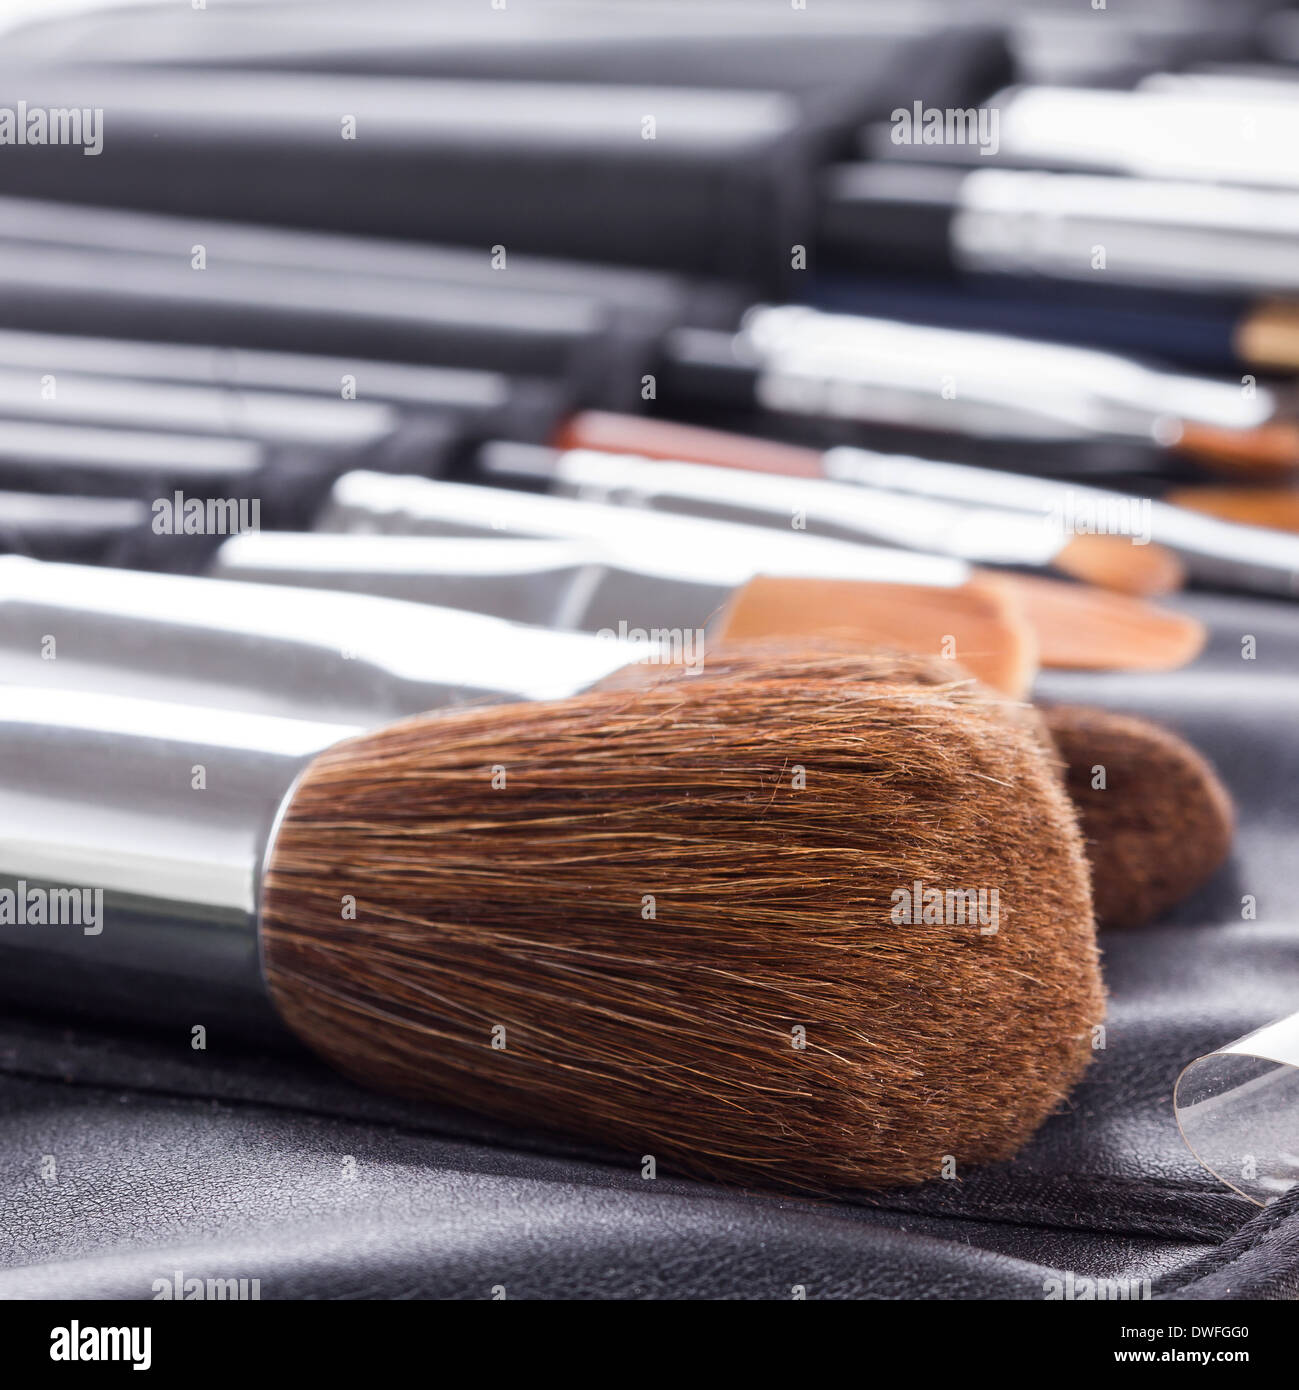 Set of professional makeup brushes in compact case  Stock Photo